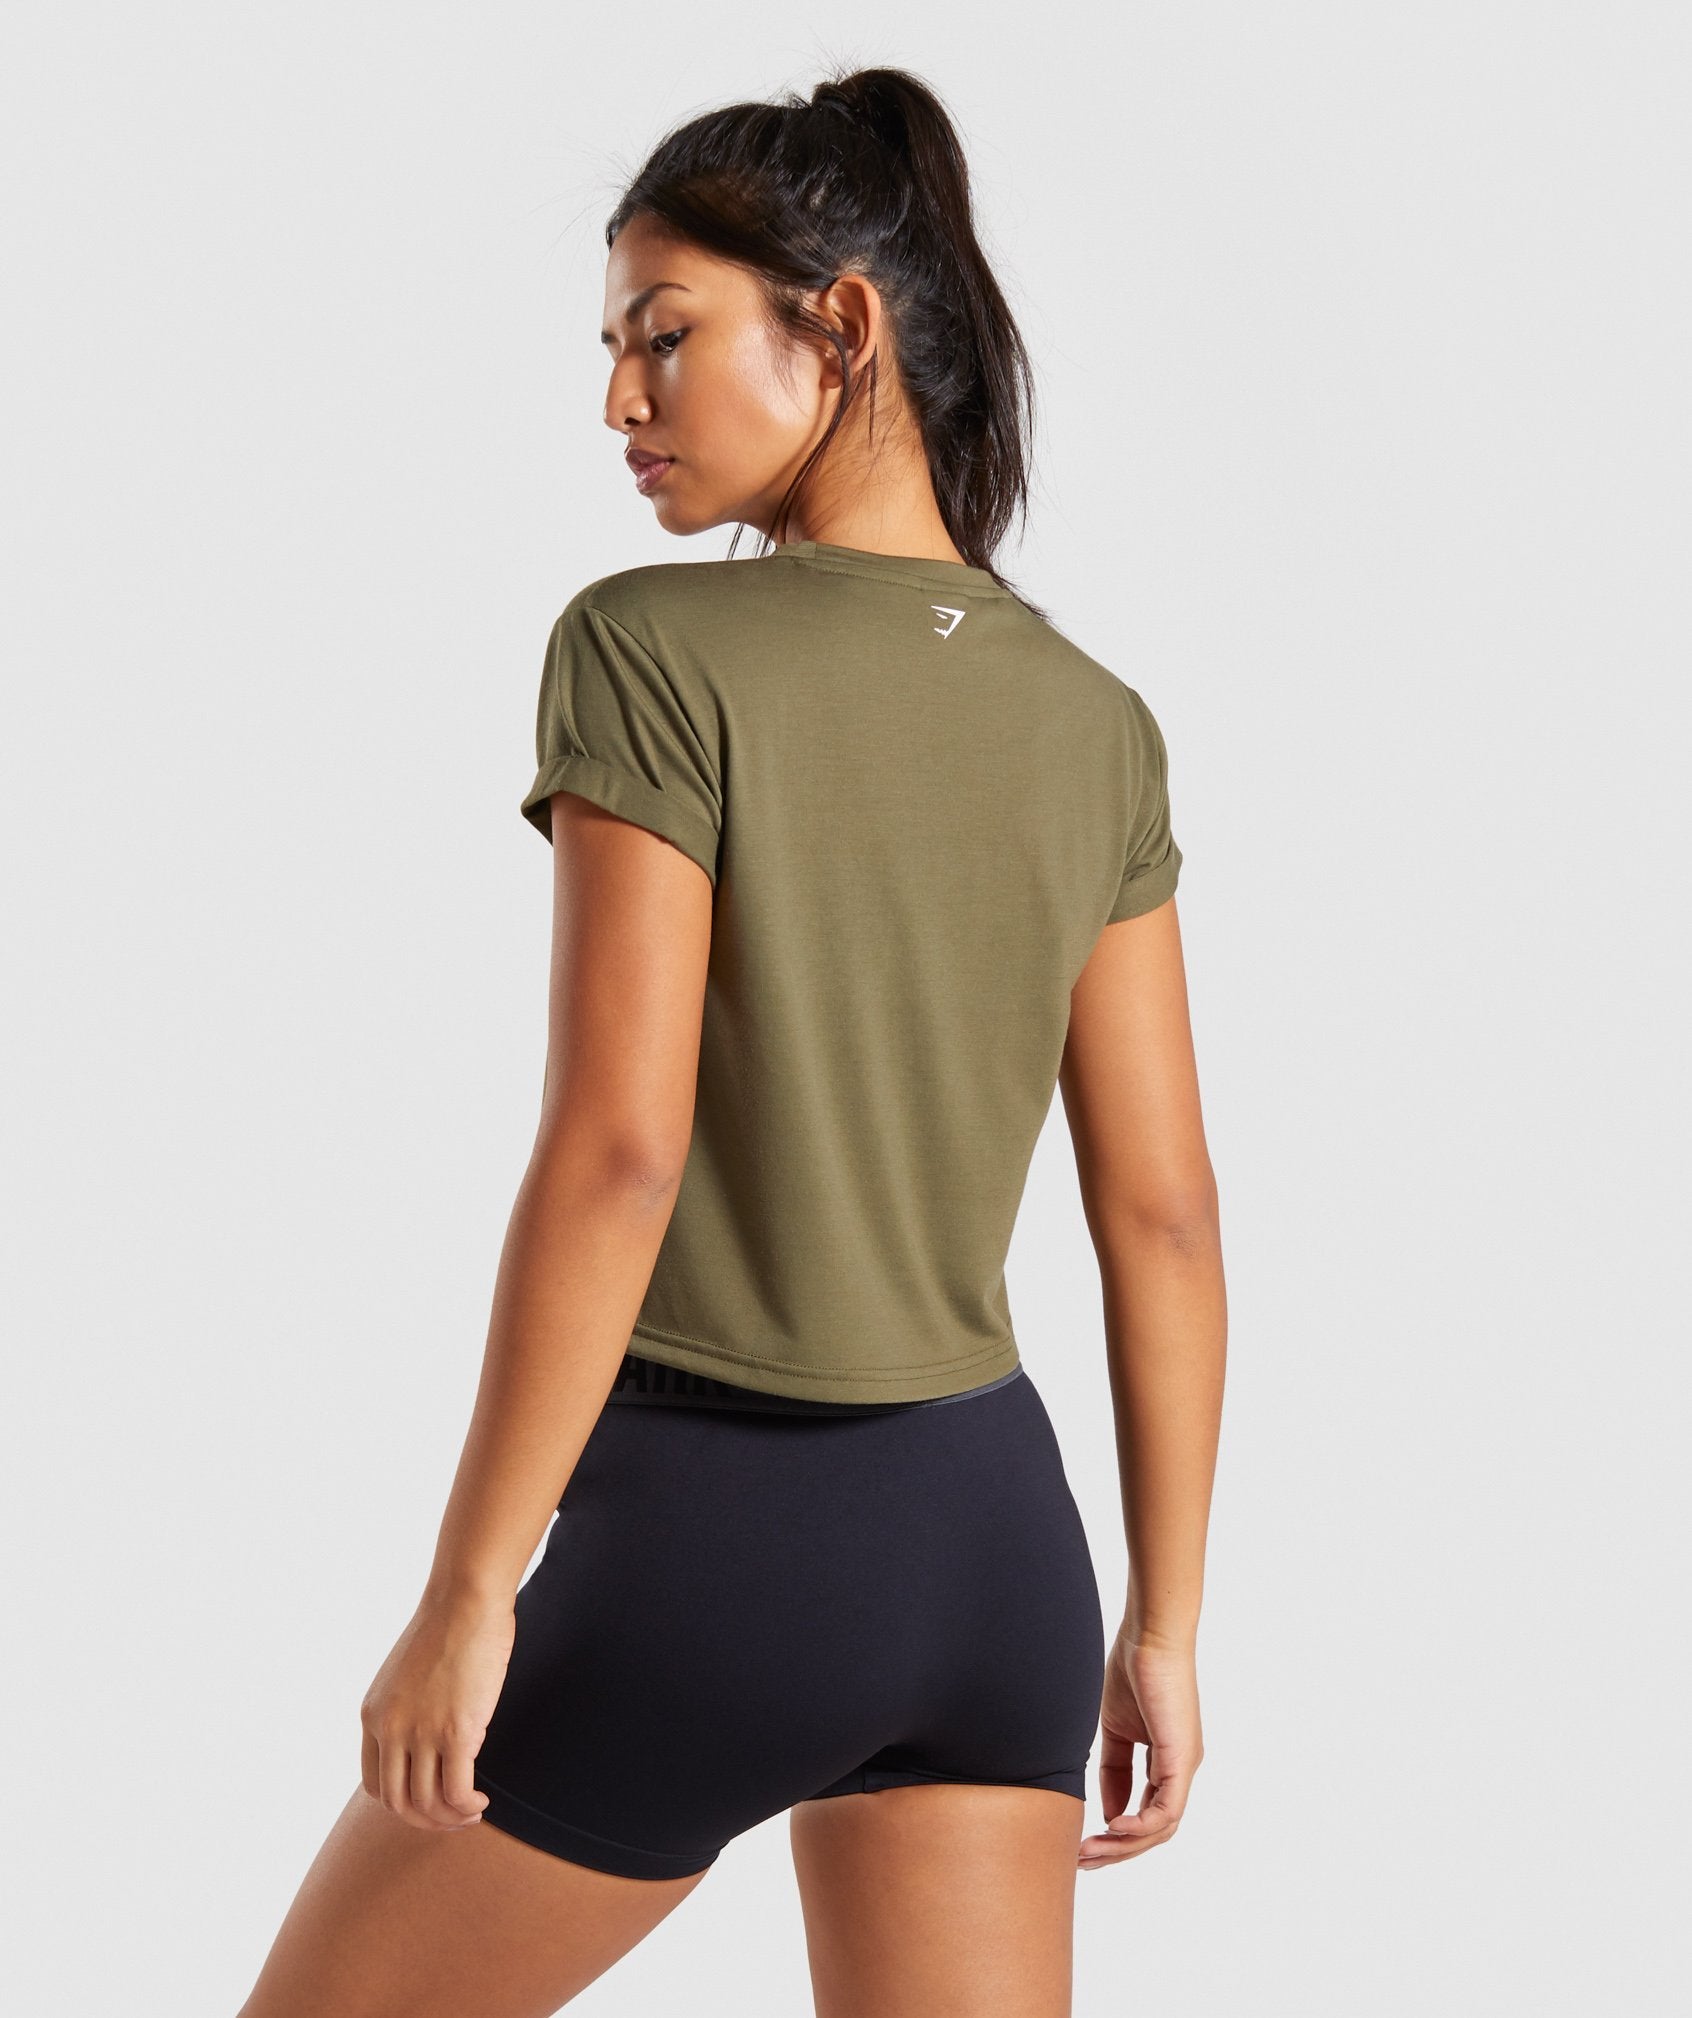 Essential Be a Visionary Tee in Khaki - view 2